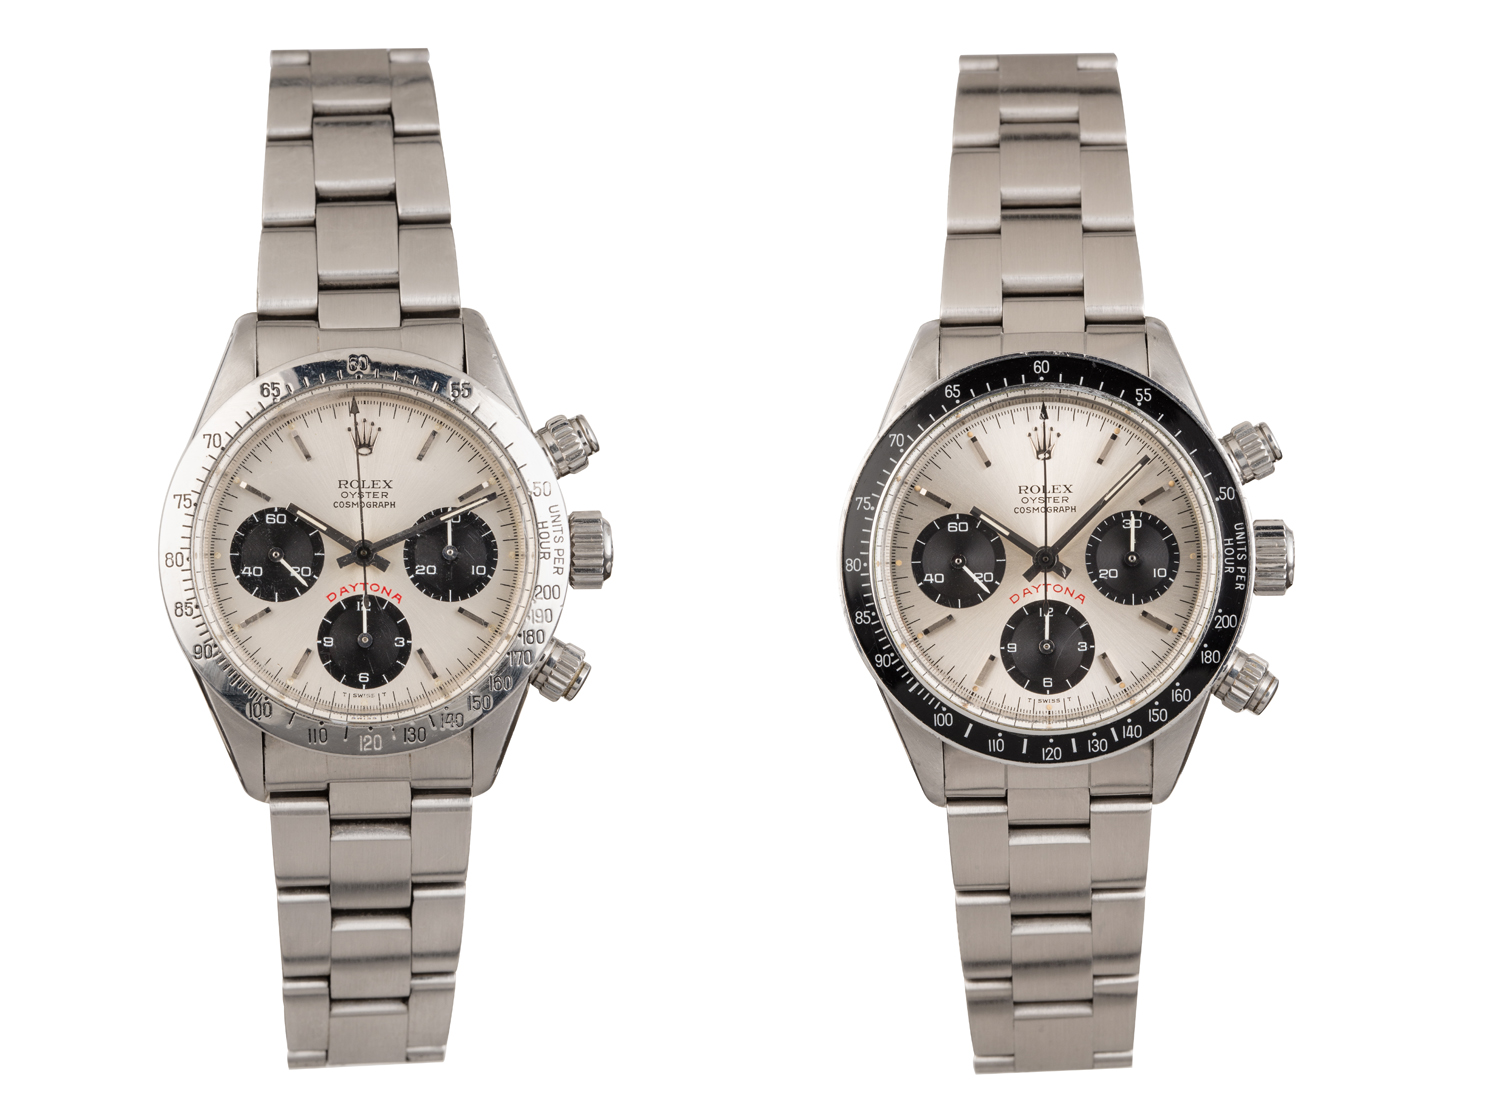 Sotheby's Hopes To Lucky With 13 Rolex Daytona Chronographs Up For Sale In An Online